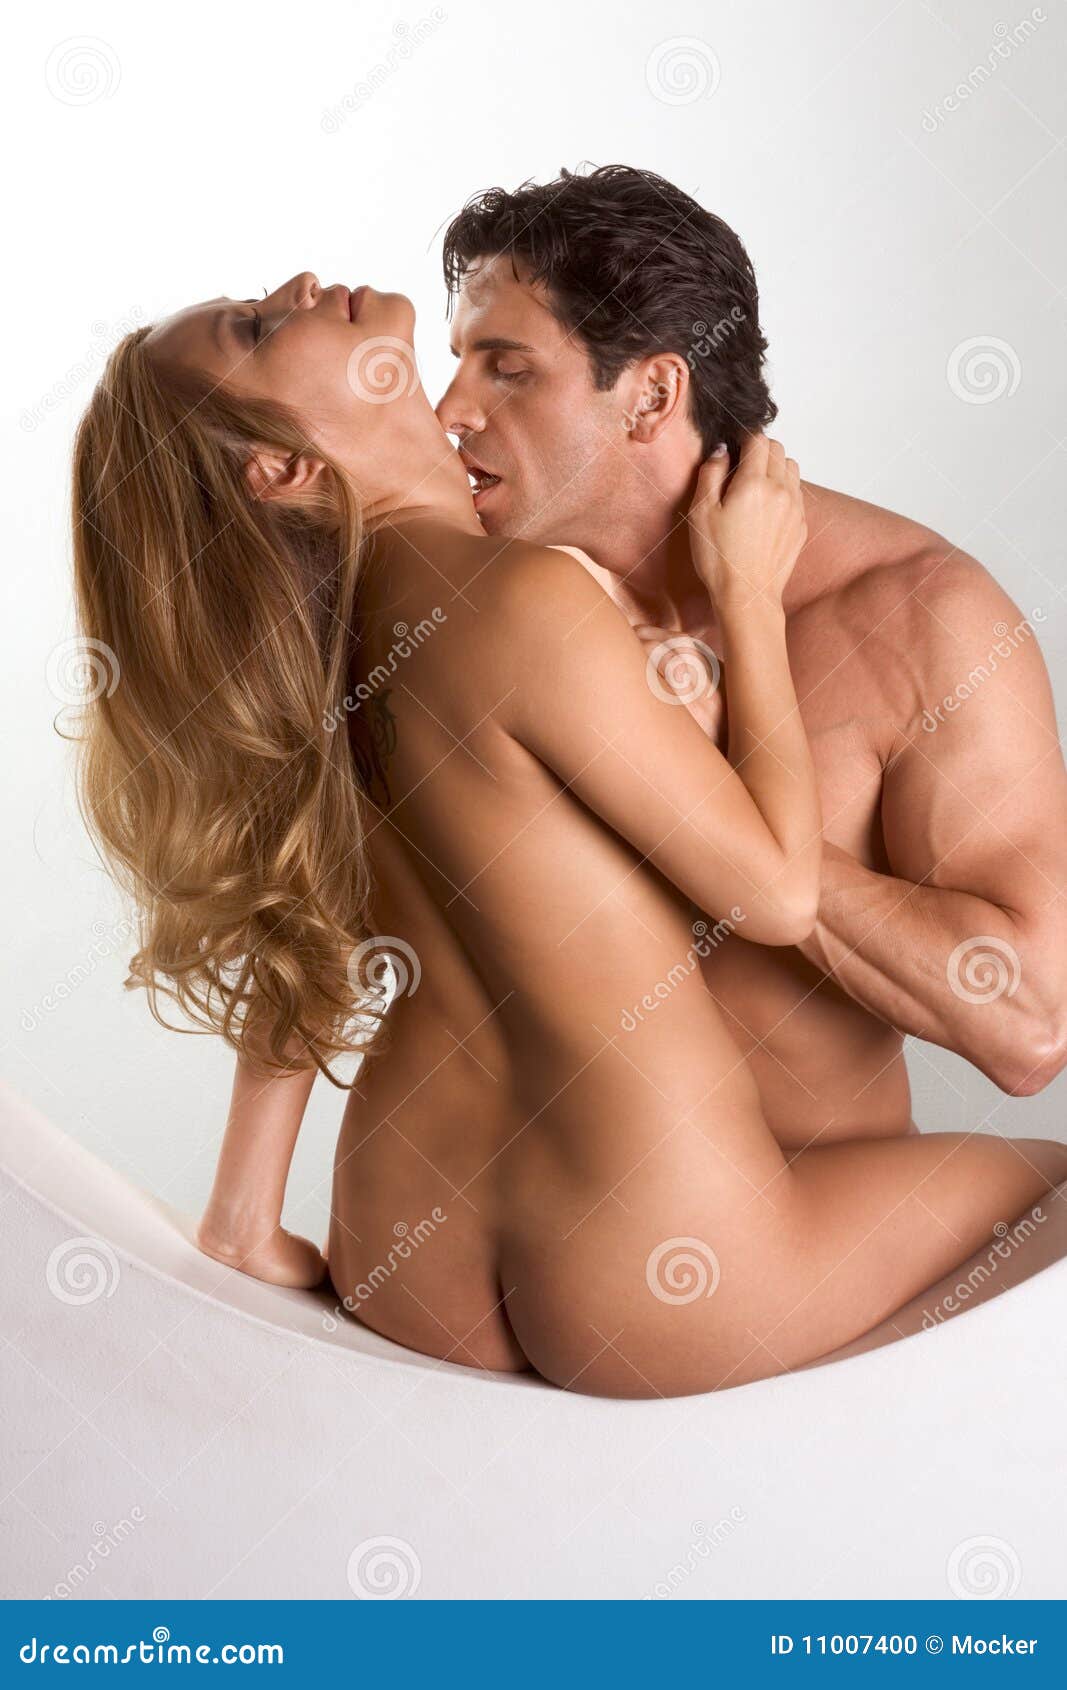 Naked Interracial Couple Kiss in Sexual Games Stock Photo